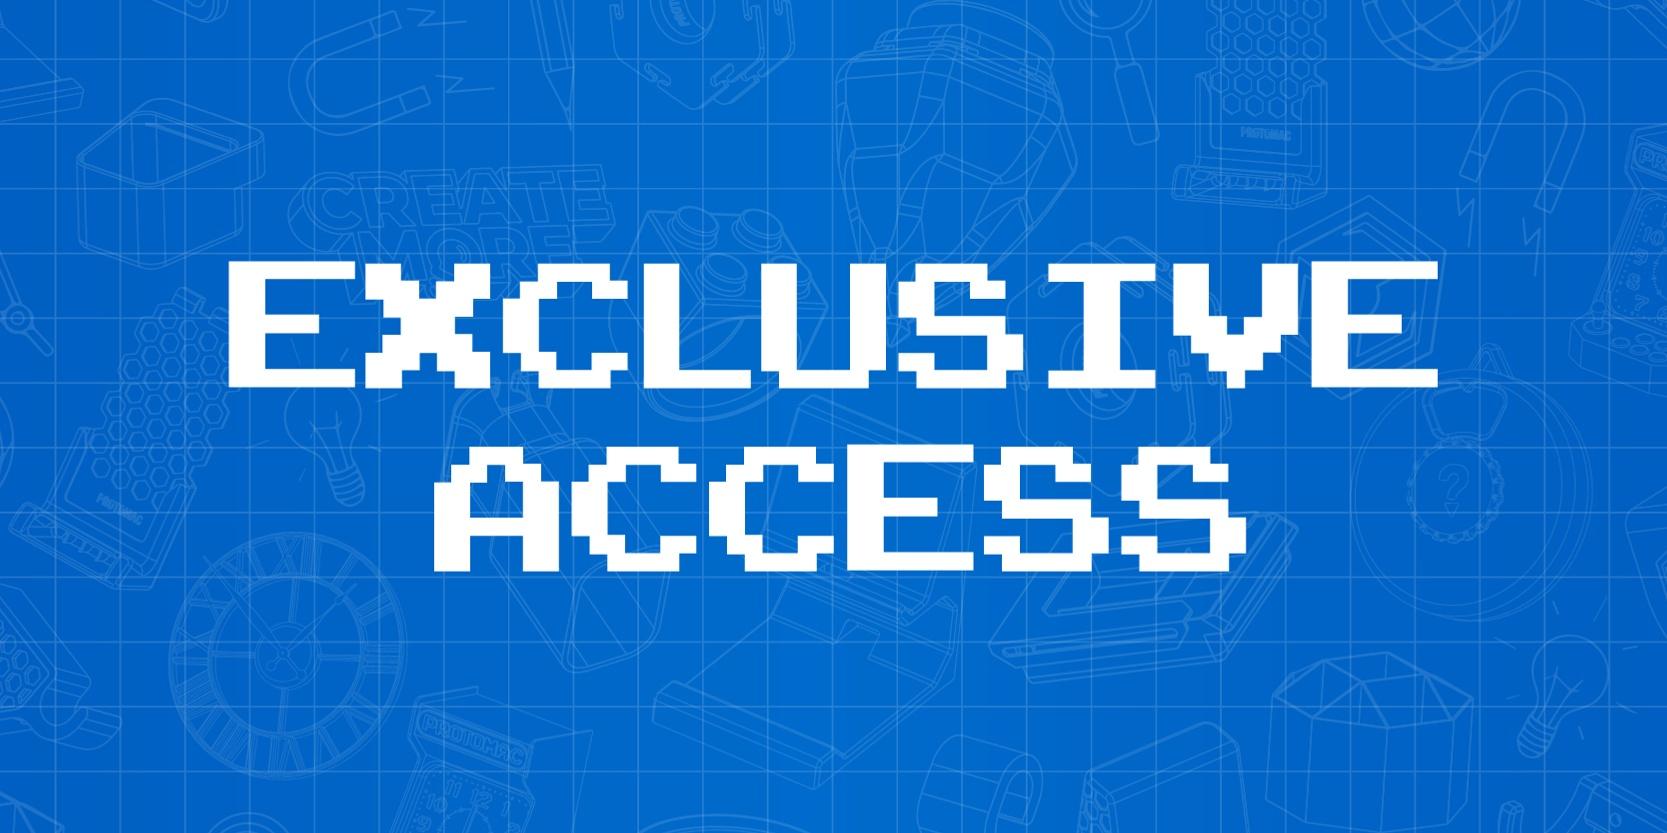 Exclusive Access